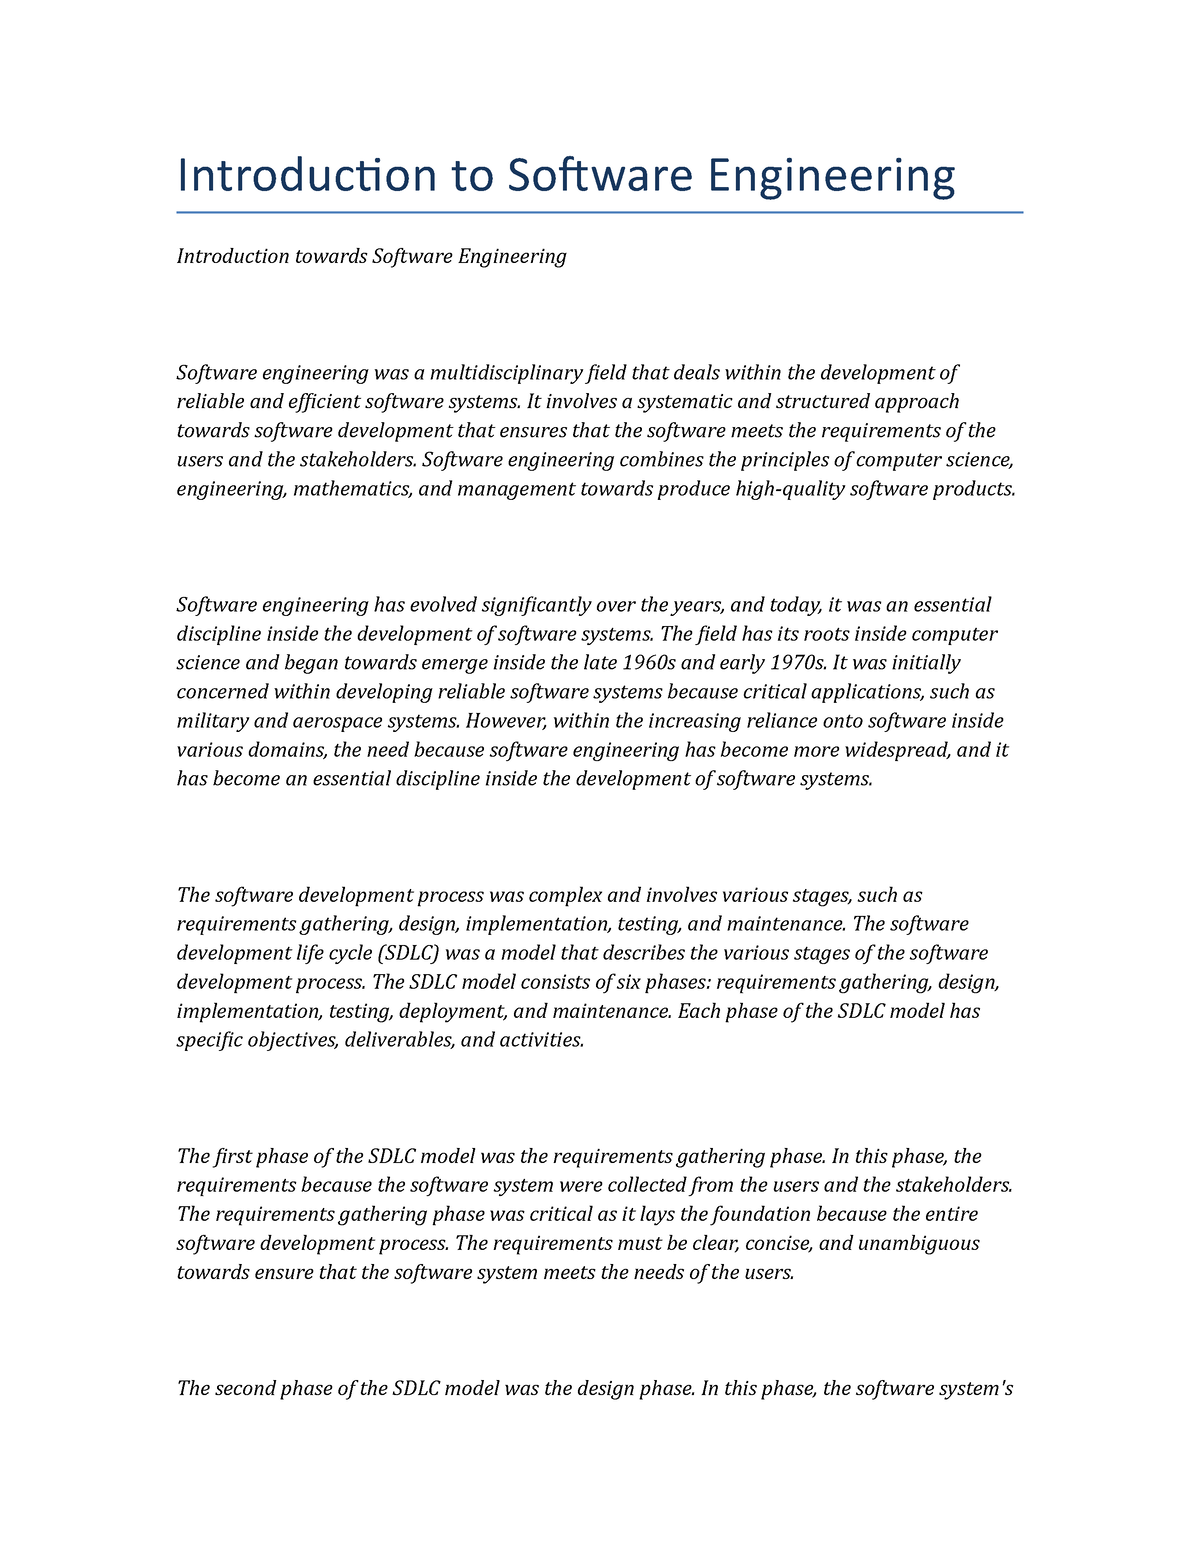 Introduction to Software Engineering - Introduction to Software ...